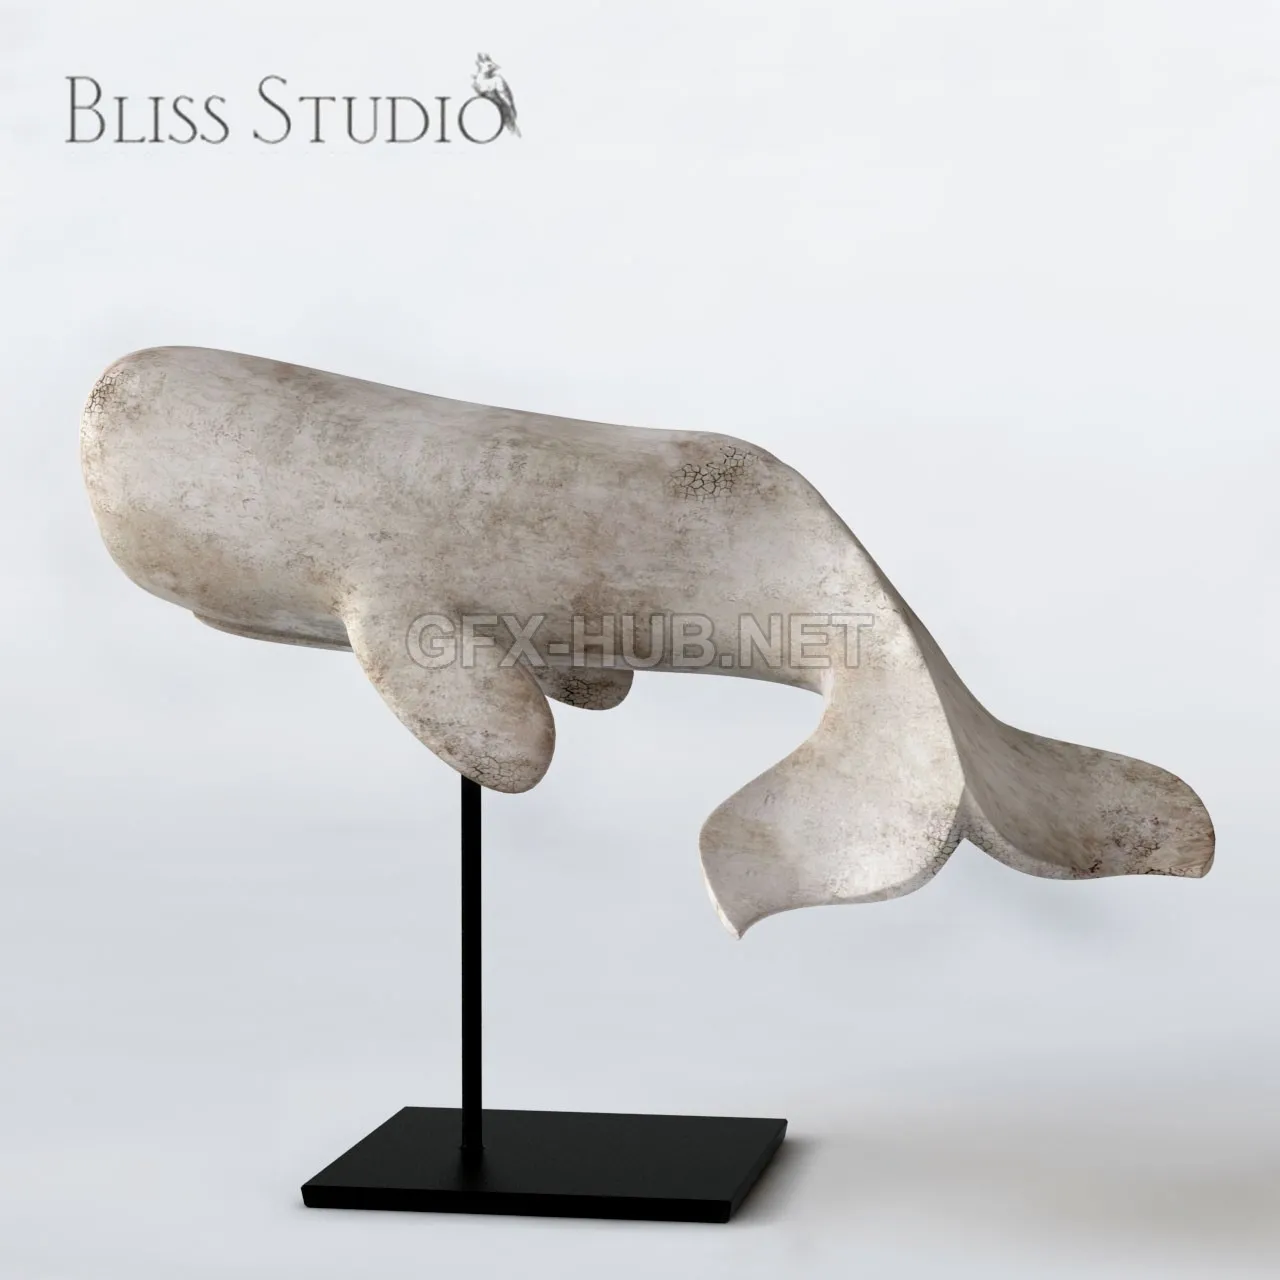 Bliss Studio White Whale on Stand – 208385